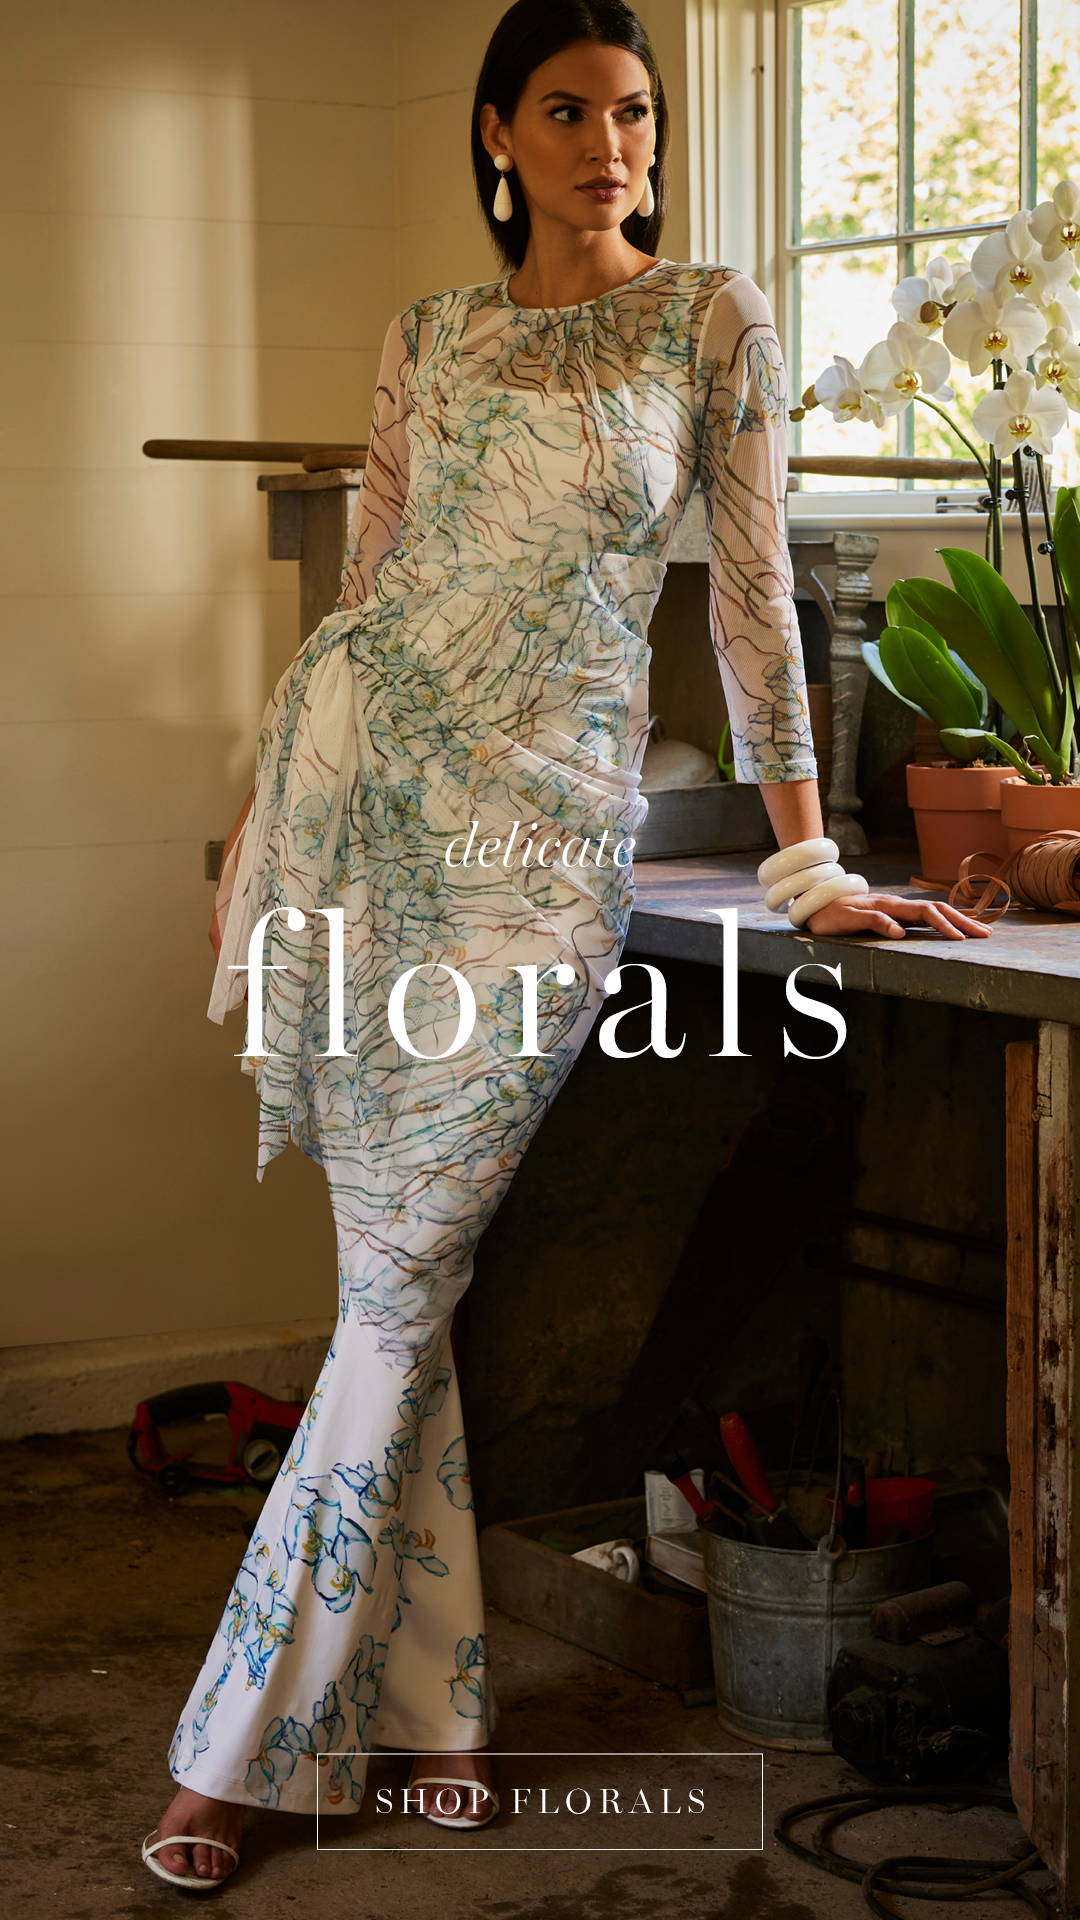 delicate florals | Woman wearing white floral tank top. andpants with mesh dress topper cover up | Shop florals